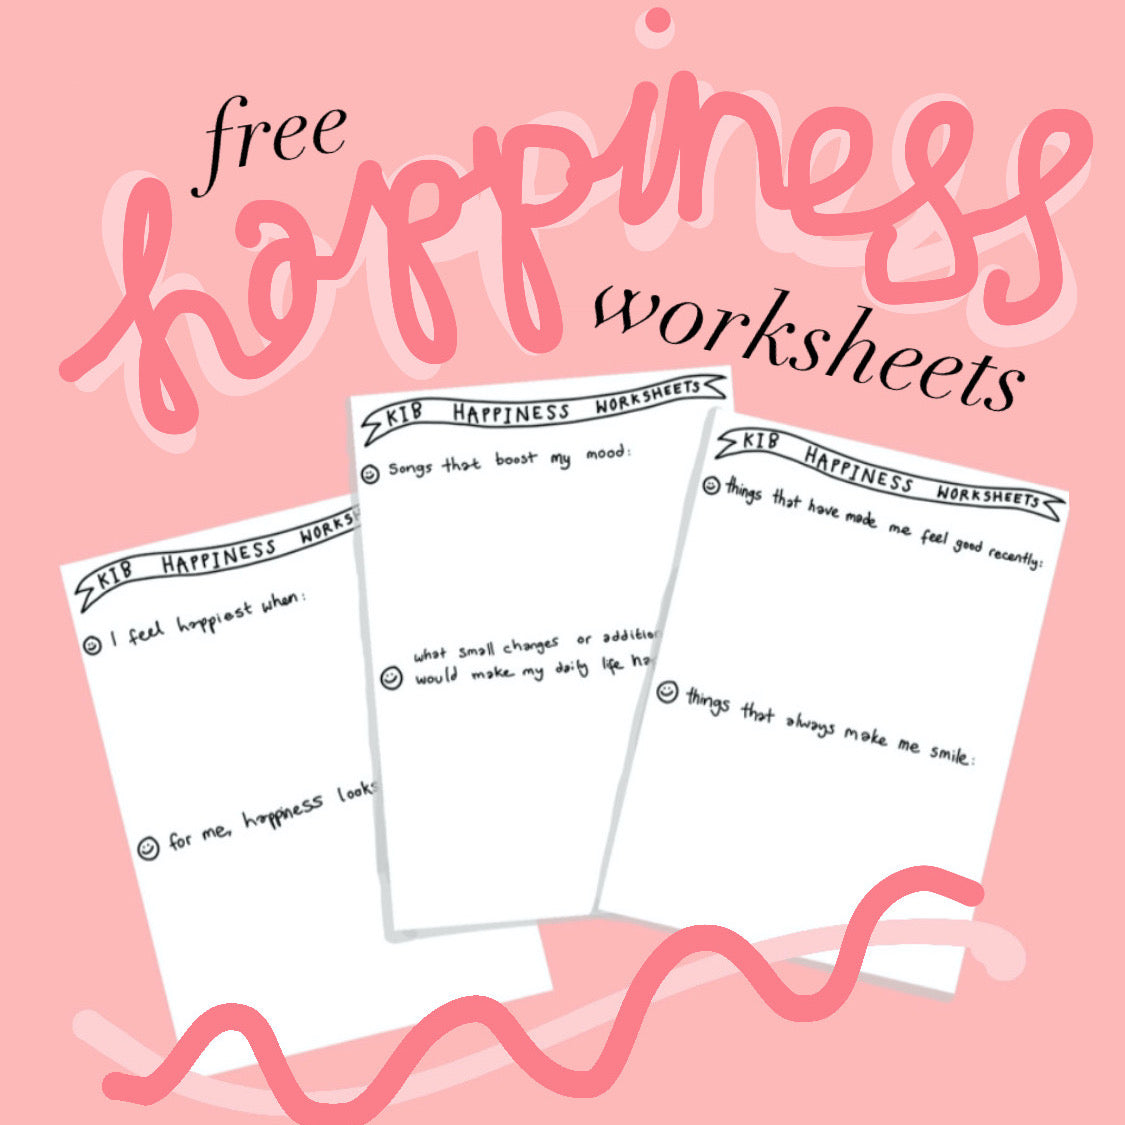 FREE happiness worksheets!